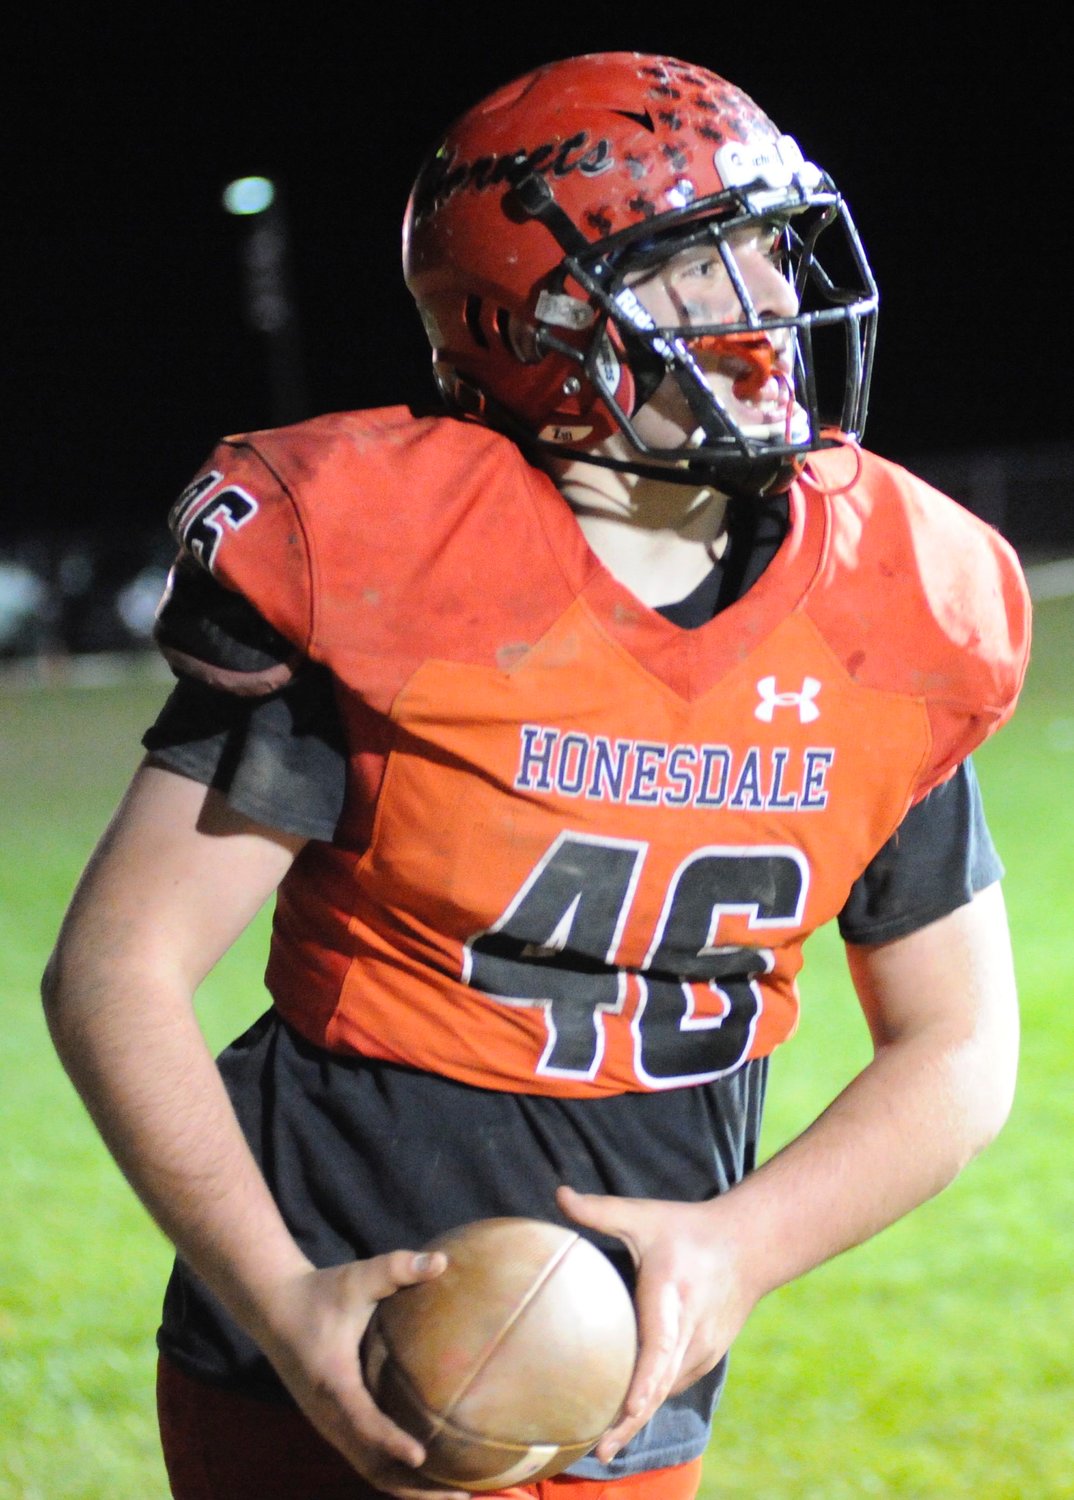 Scored one for the home team. Honesdale’s Arron Phillips scored from the 1-yard line in the second frame, and racked up a total of 15 yards, in the Hornets 47-0 victory over Wes Scranton on October 28, 2021.